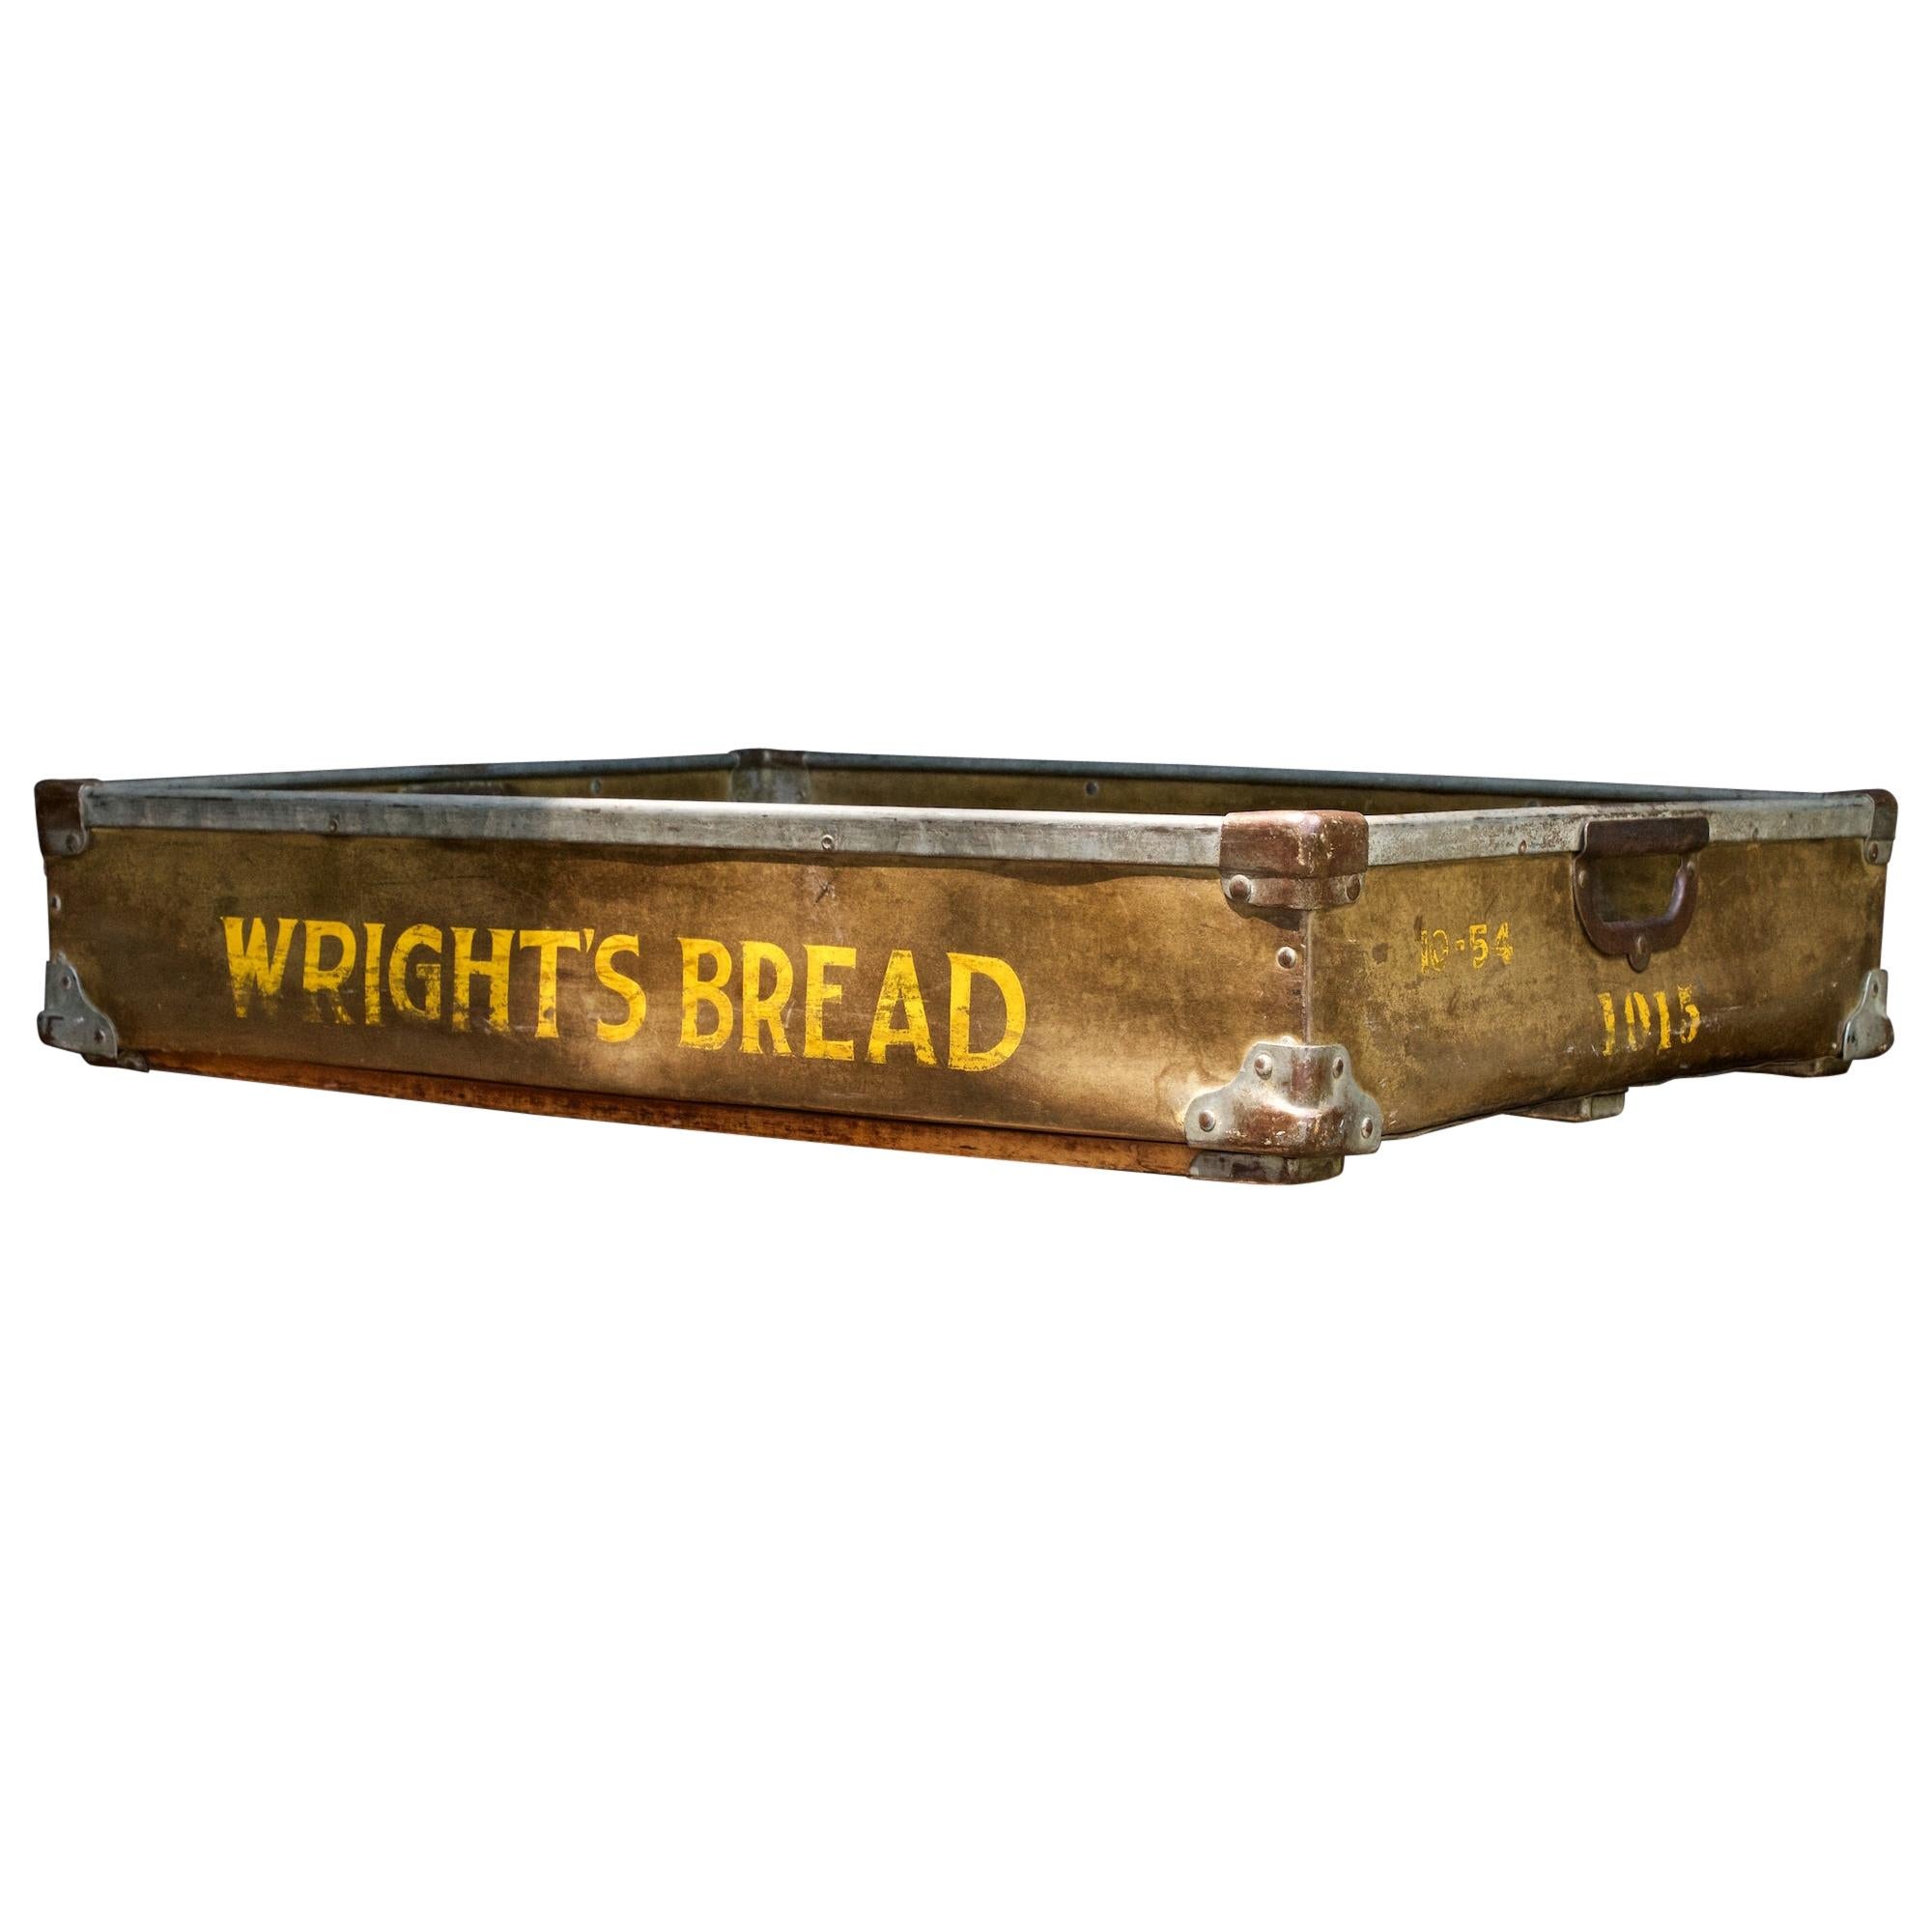 1950s Wrights Bread Crate Vintage Industrial Vulcanized Display Box Basket Tray For Sale